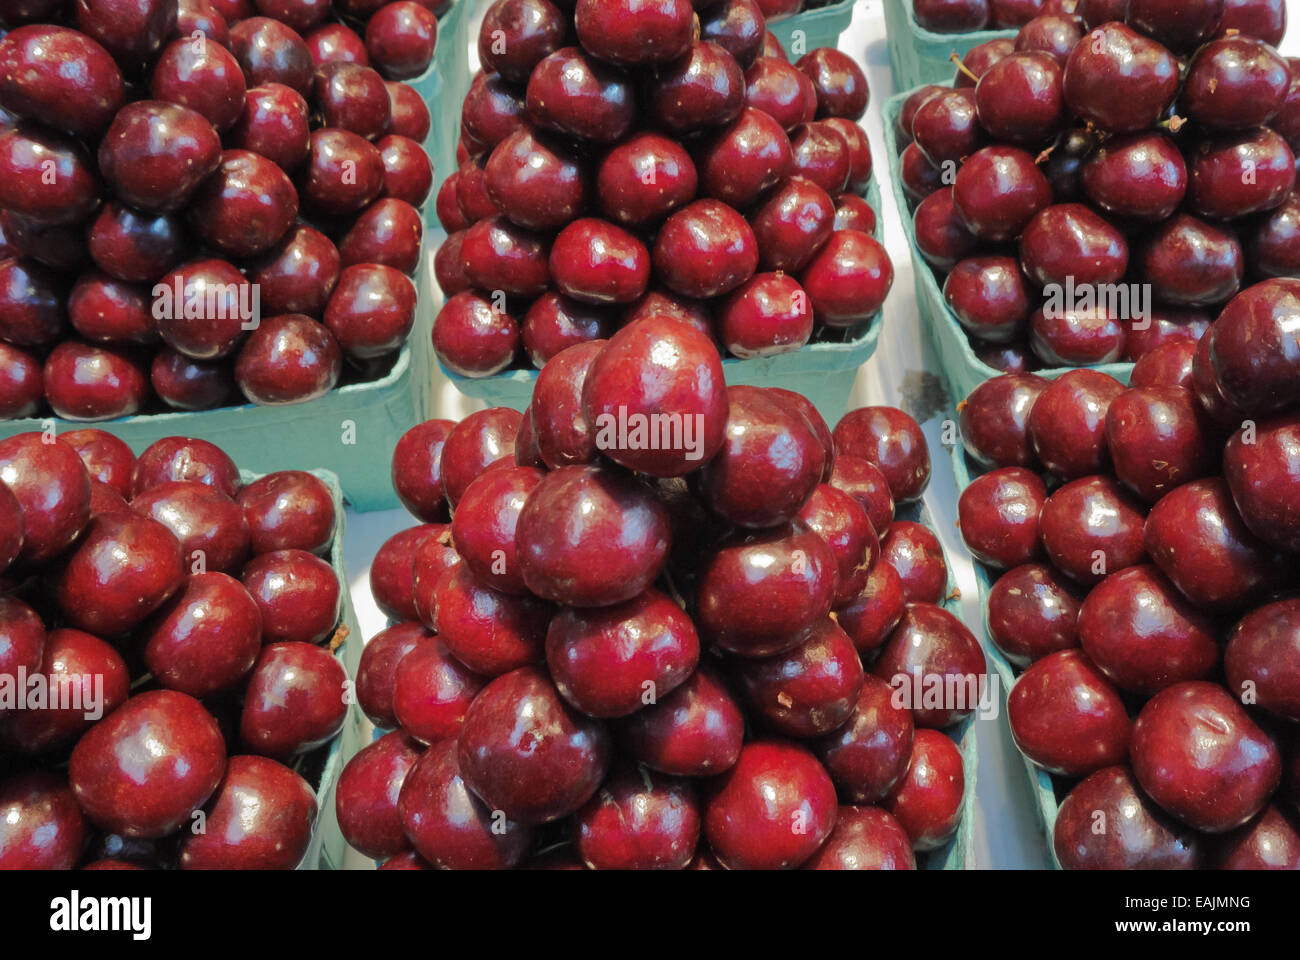 Cherries displayed in green cartons at market Stock Photo